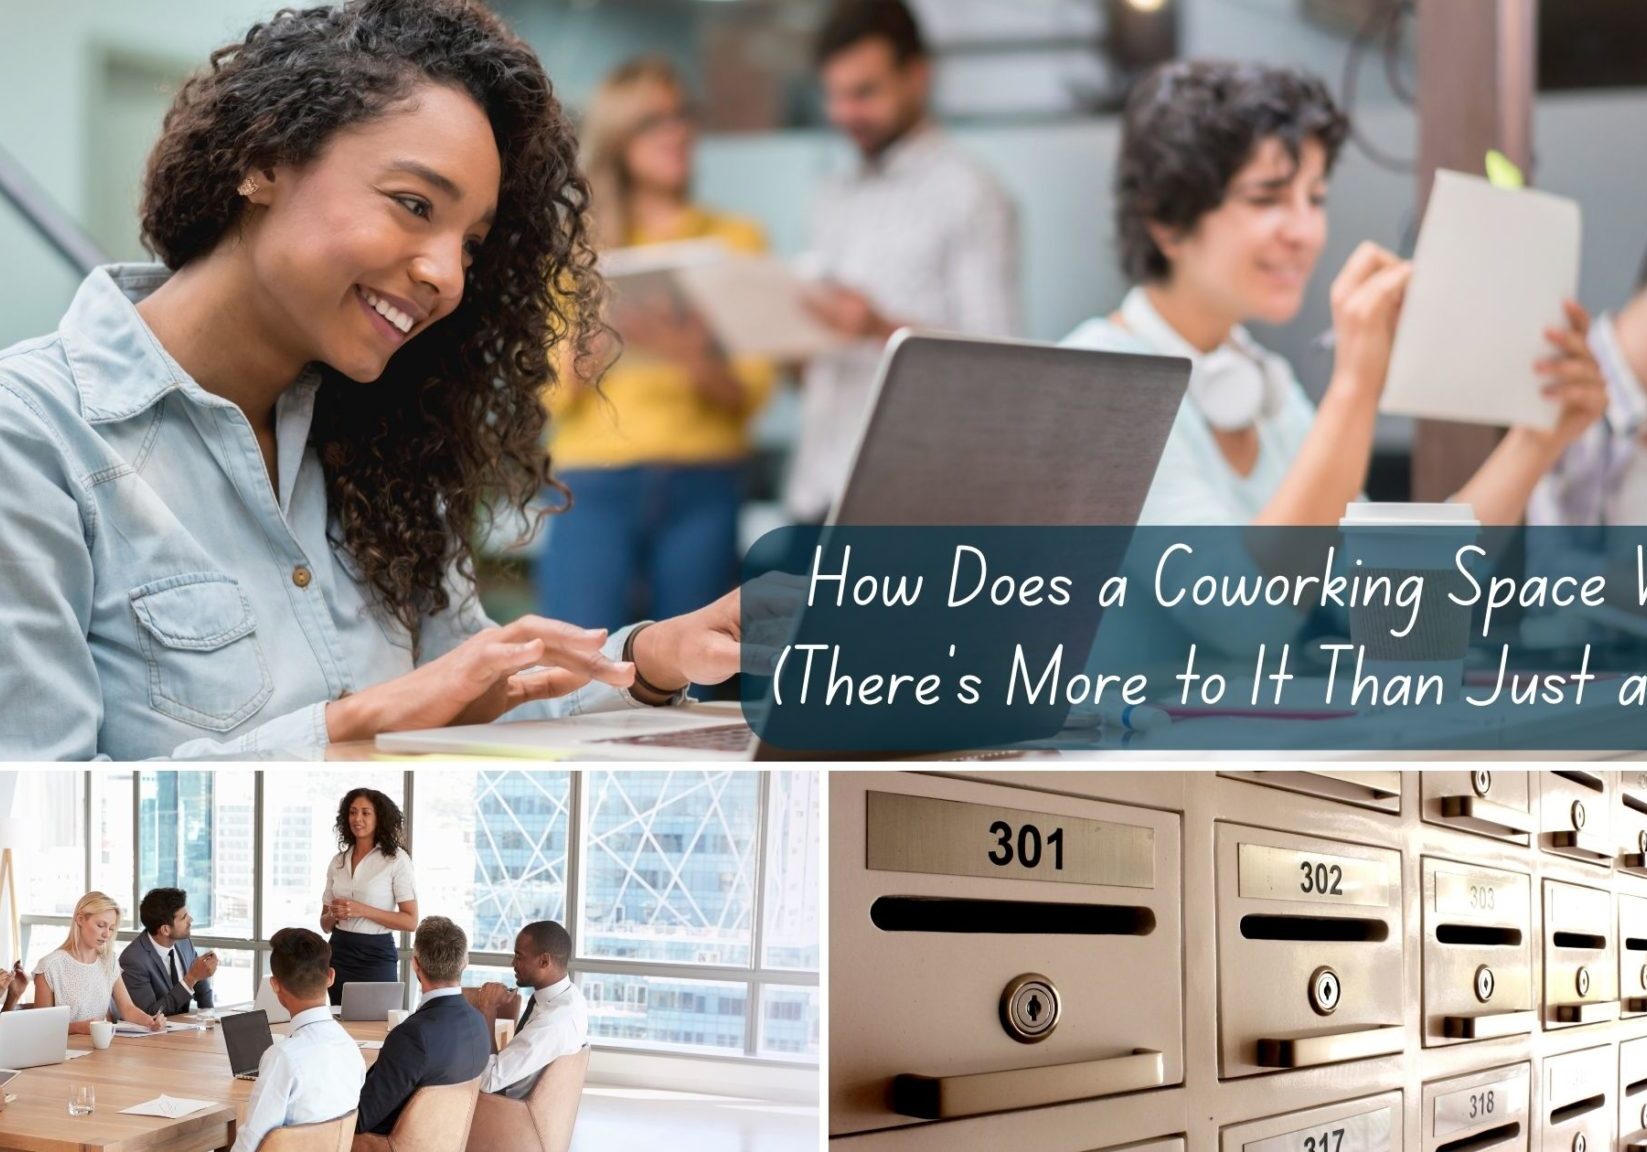 How Does a Coworking Space Work? (There’s More to It Than Just a Desk)